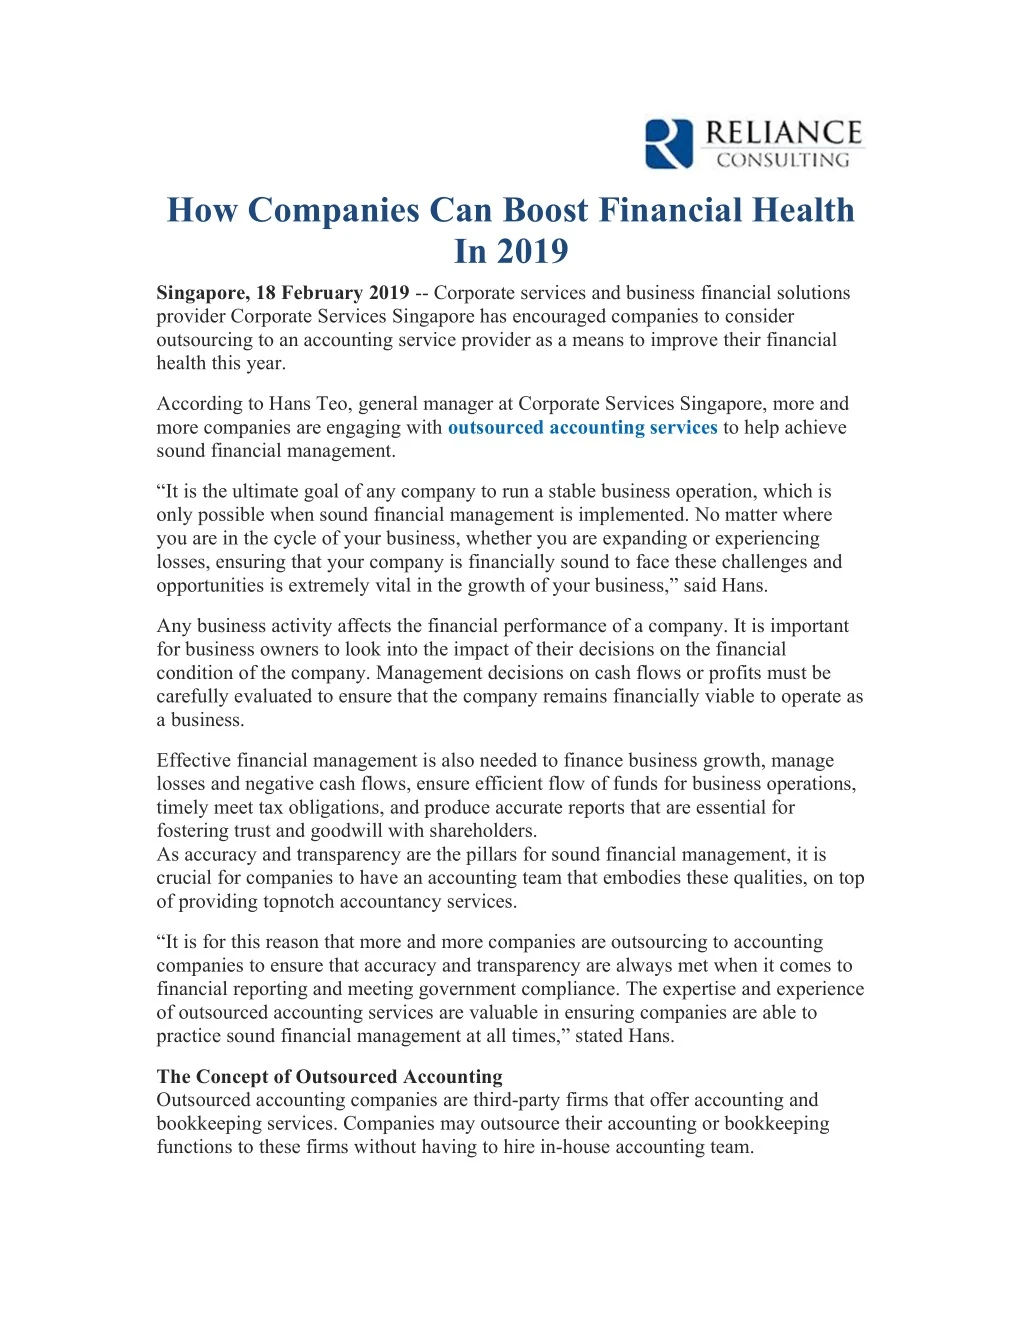 how companies can boost financial health in 2019